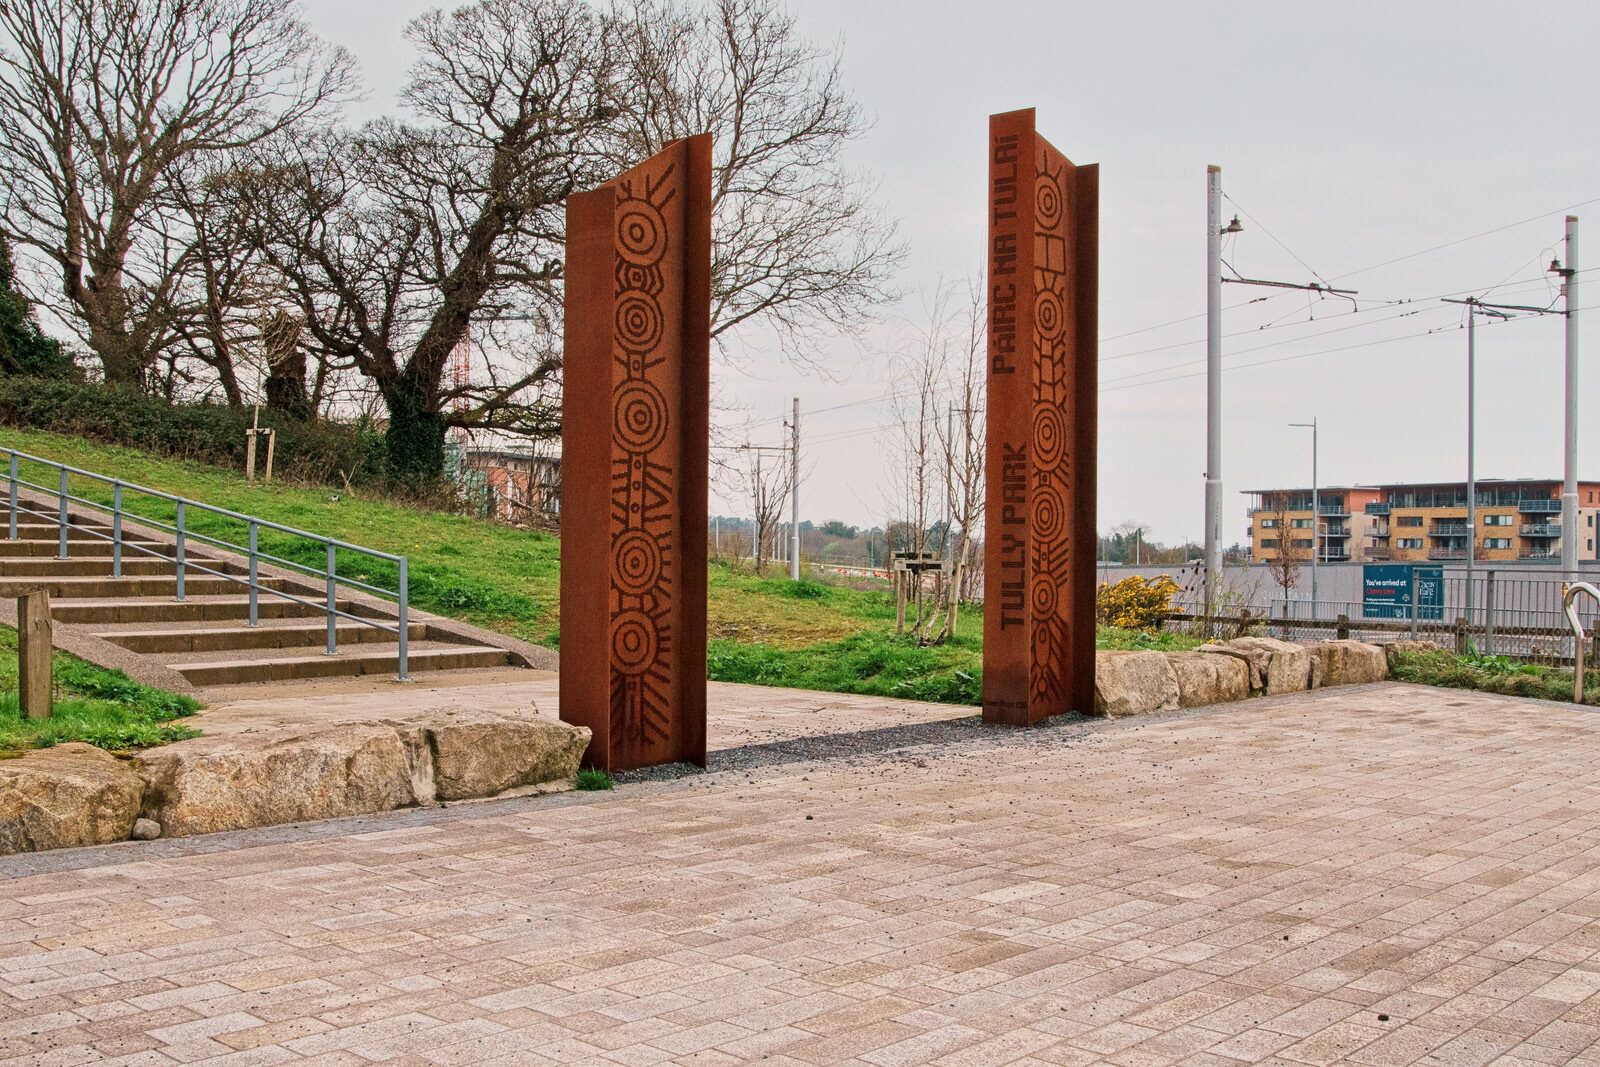 BISHOP STREET ENTRANCE TO TULLY PARK [COULD BE CORTEN STEEL SCULPTURES]-223579-1